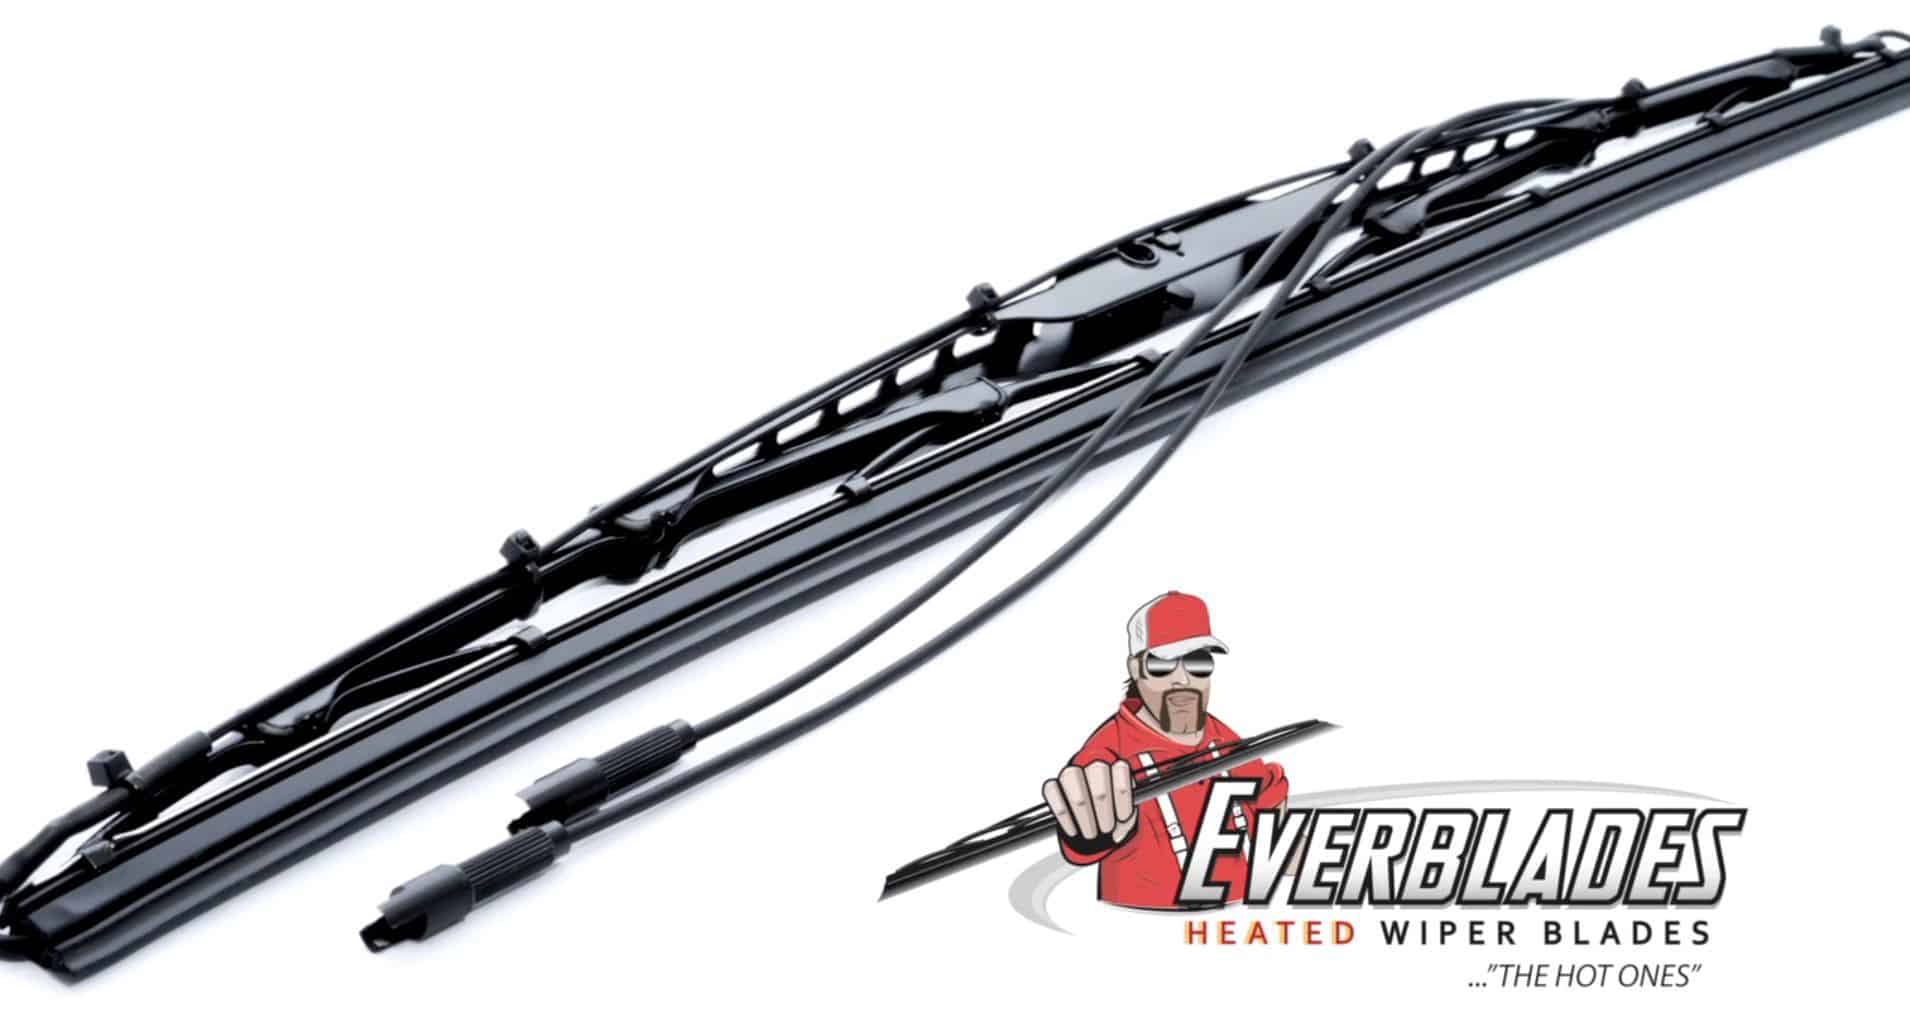 Heated Wiper Blades are a HOT Snow Plow Accessory!